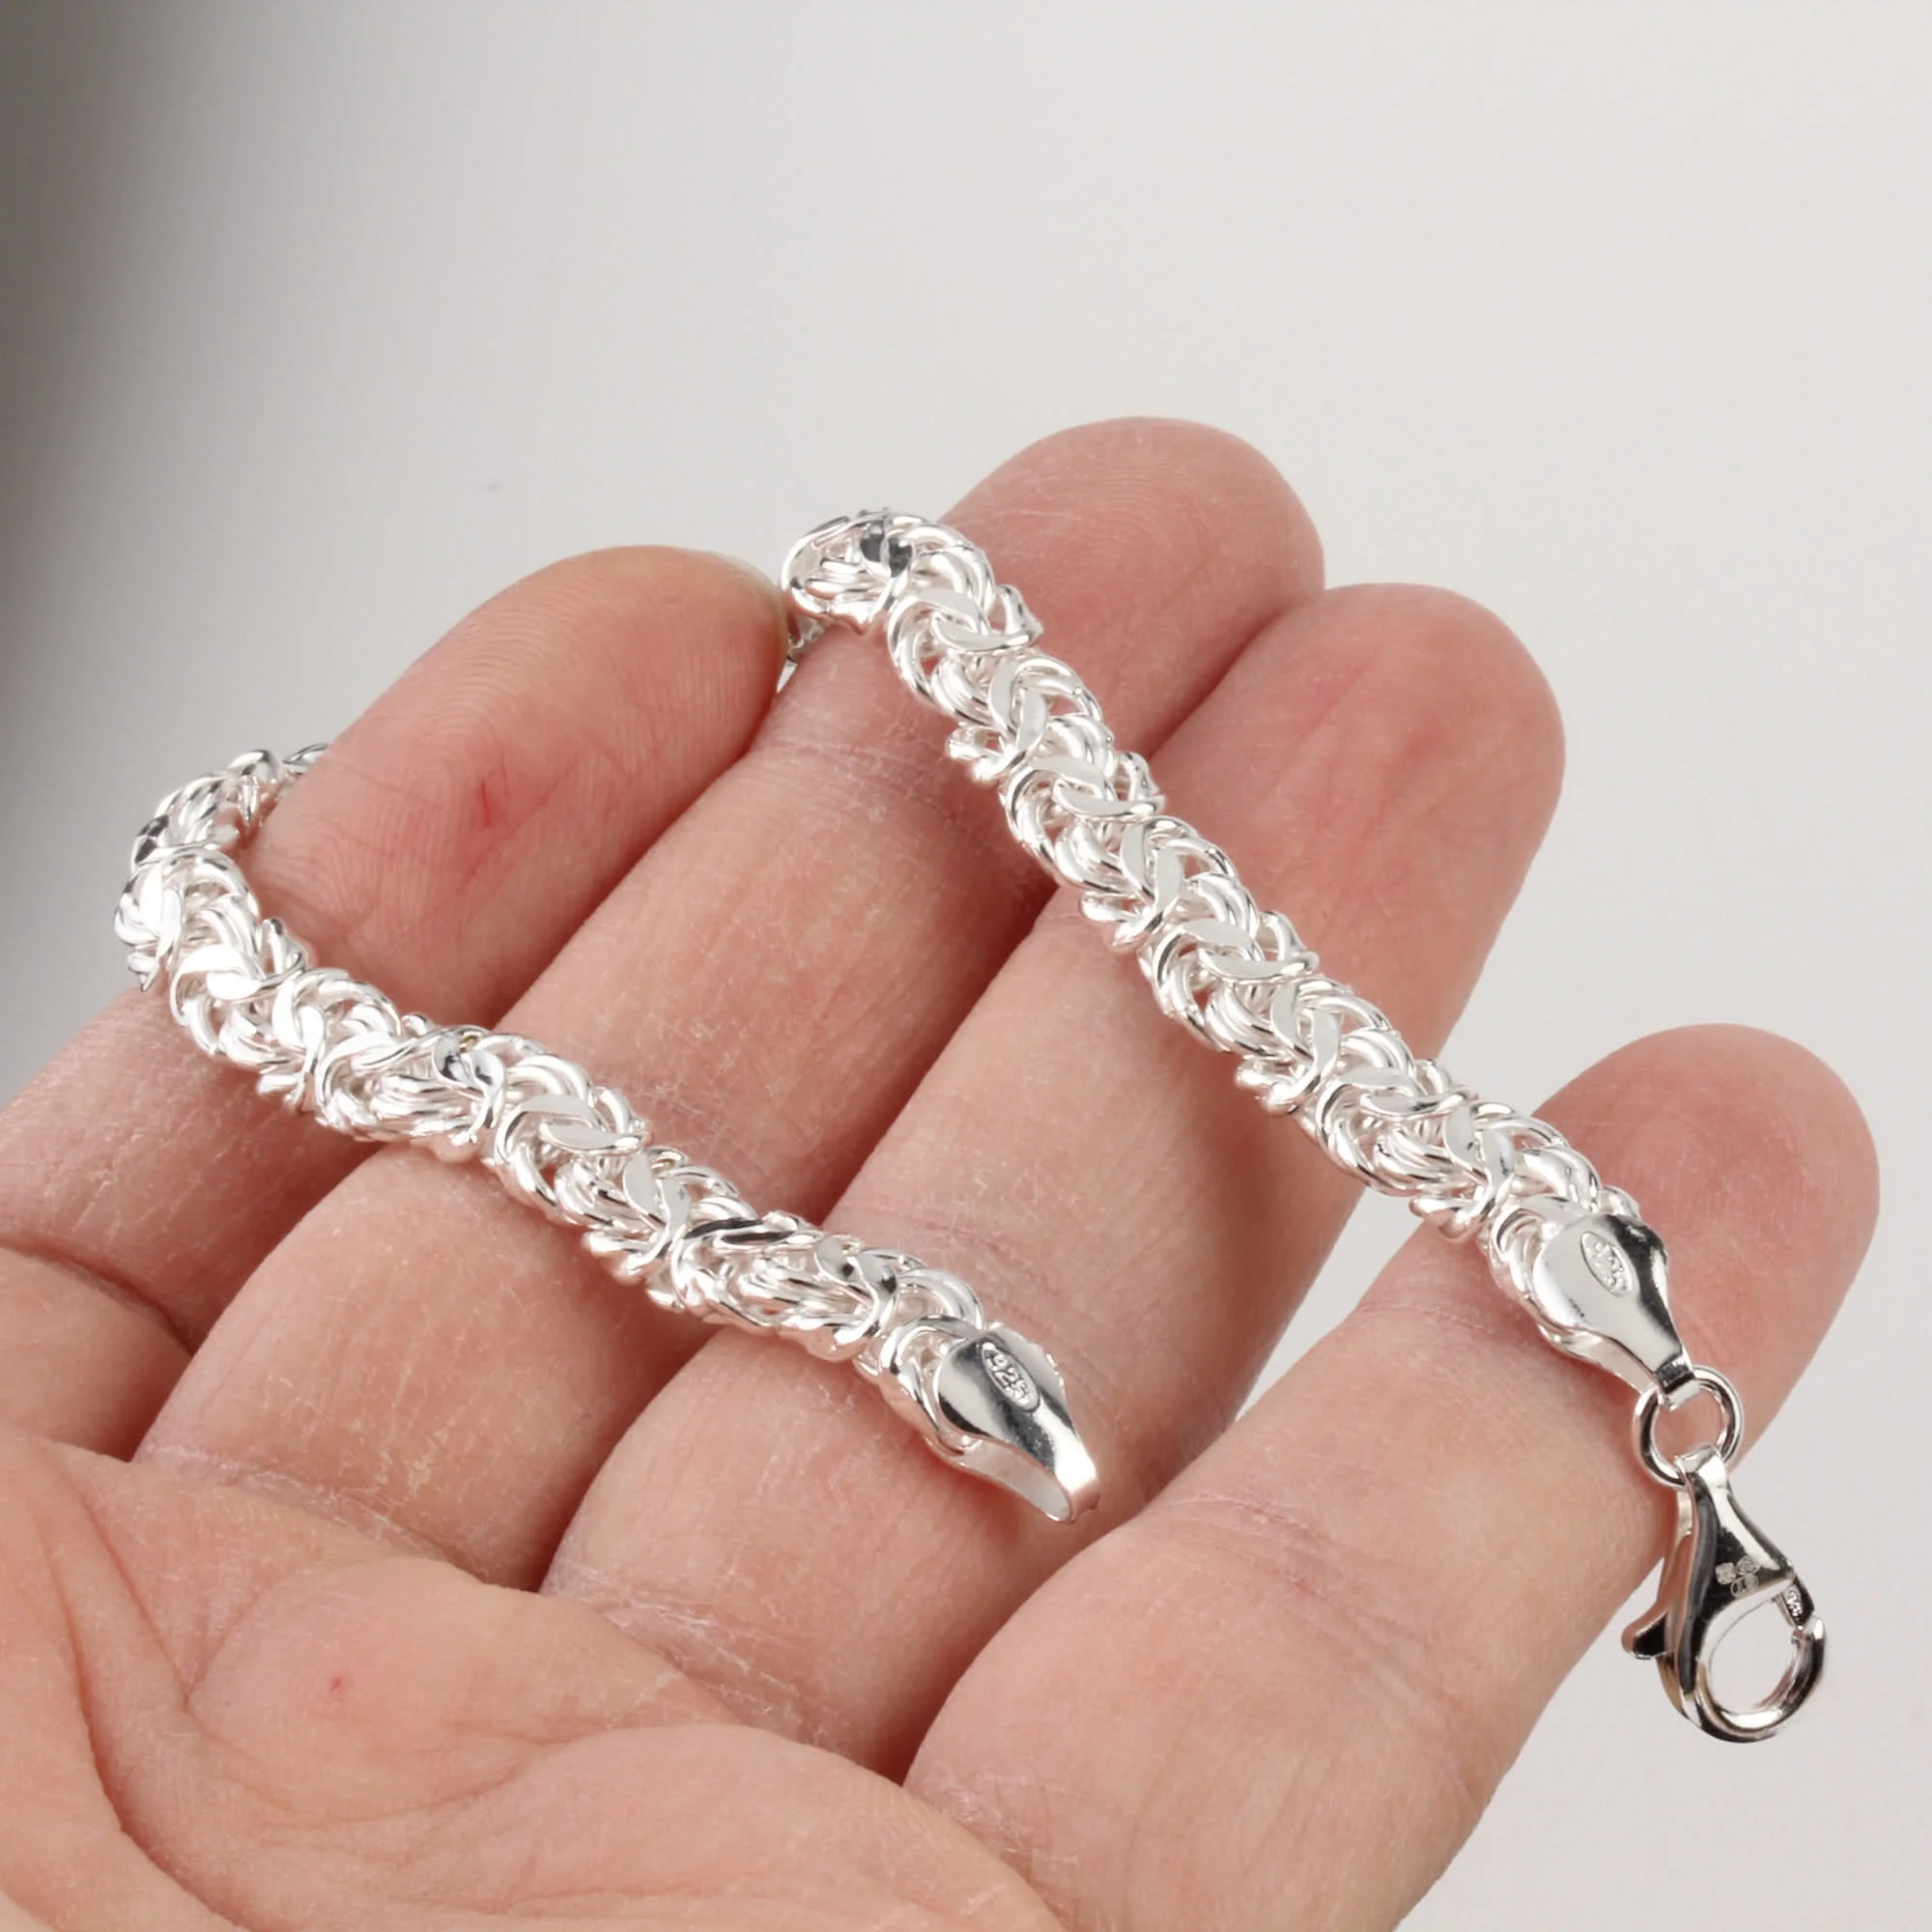 Amazon.com: Adjustable Sterling Silver Bangle Bracelet,Chain Bracelets, Ladies 925 Sterling Silver Bracelet Hand Silver Stars Bracelet Fashion Bracelet  Ladies Silver Jewellery Gifts : Clothing, Shoes & Jewelry